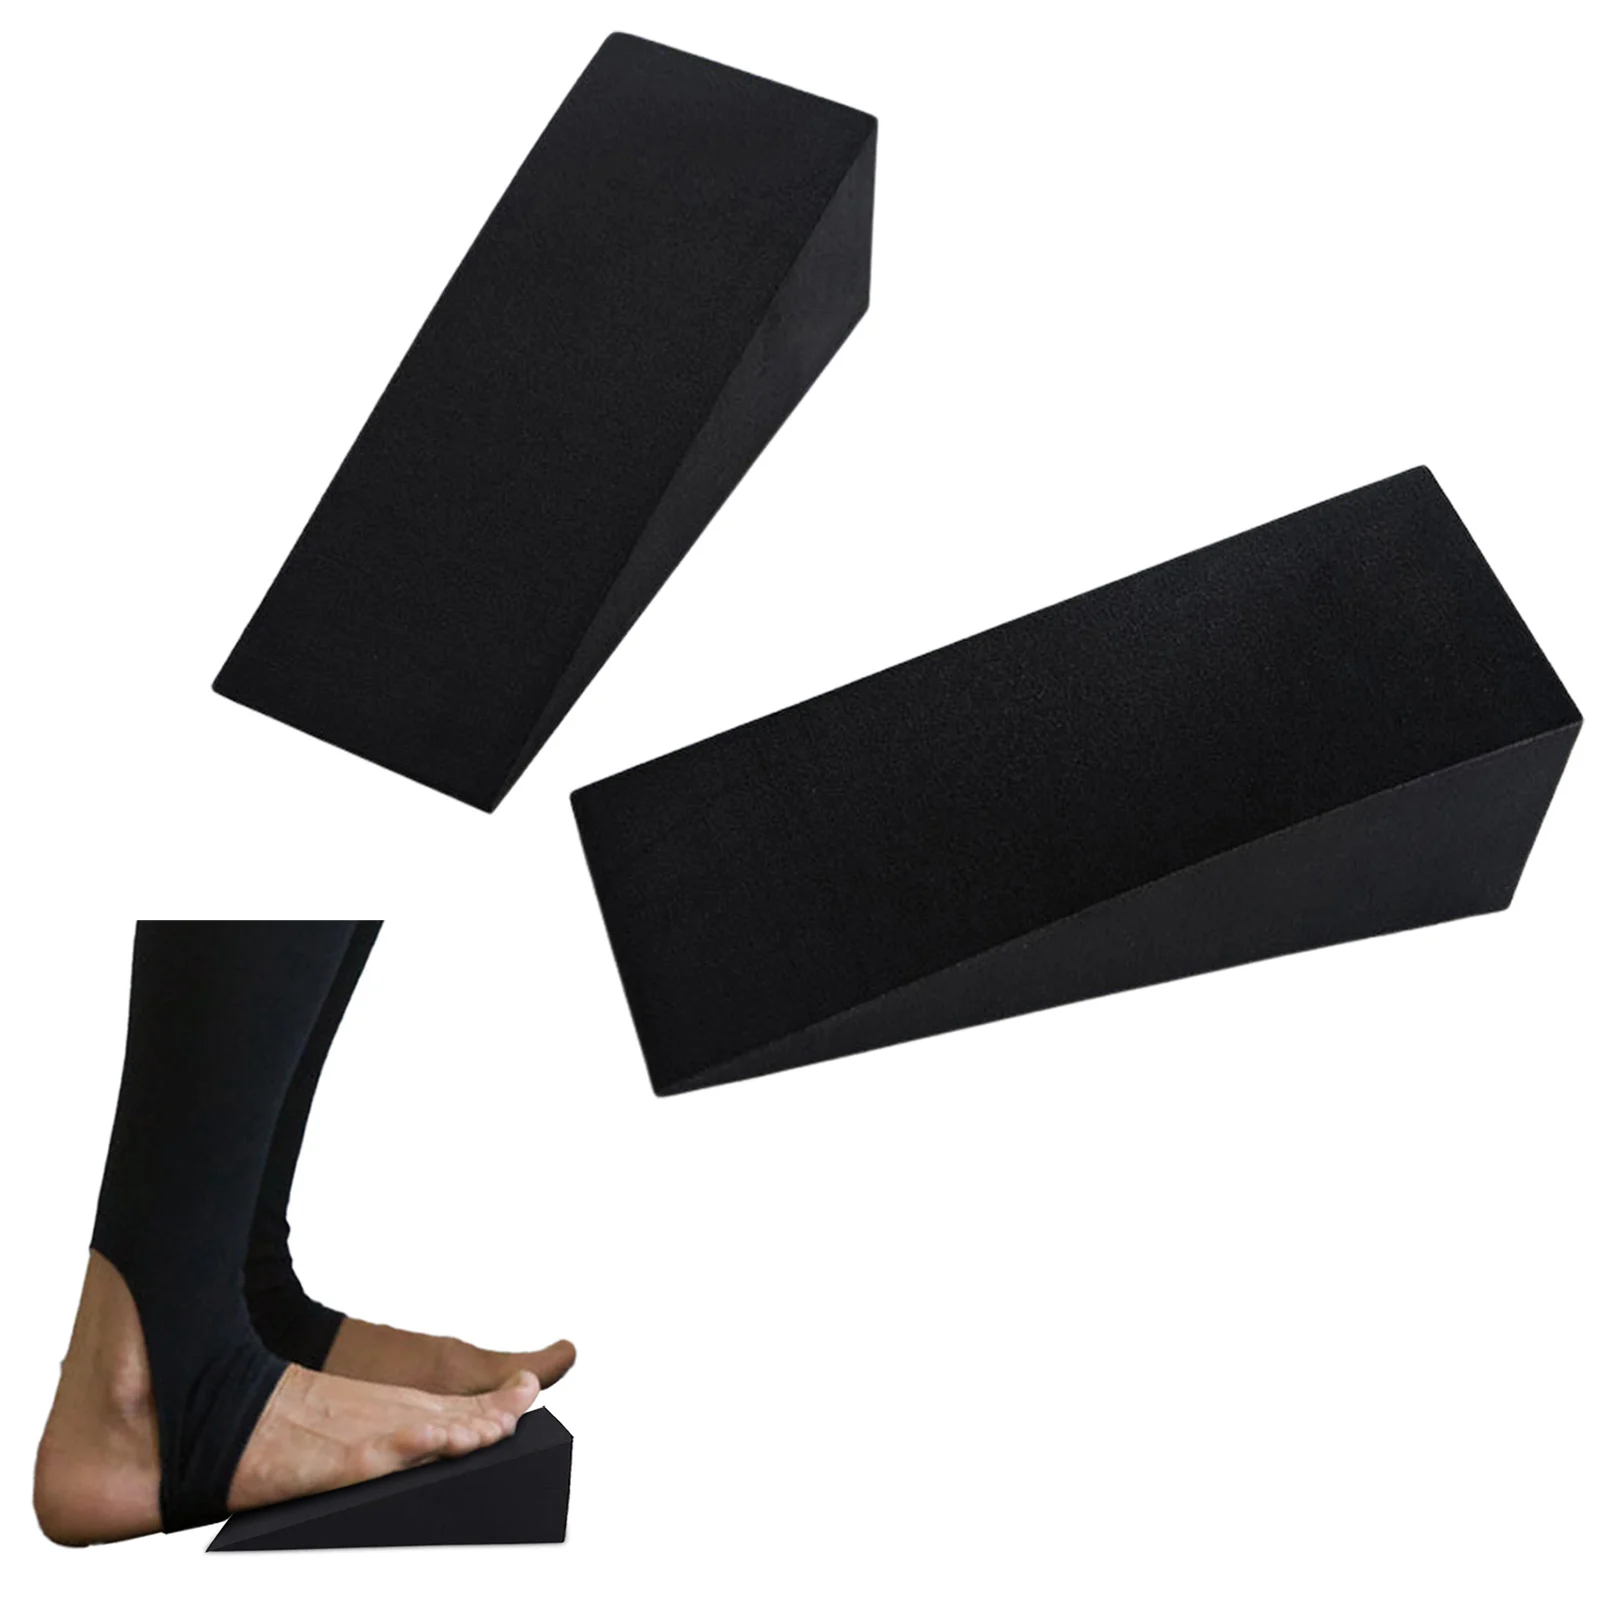 

Yoga Slant Board Calf Stretcher To Improve Lower Leg Strength Stability Non-Slip Stretching Board For Home Office Extra Side